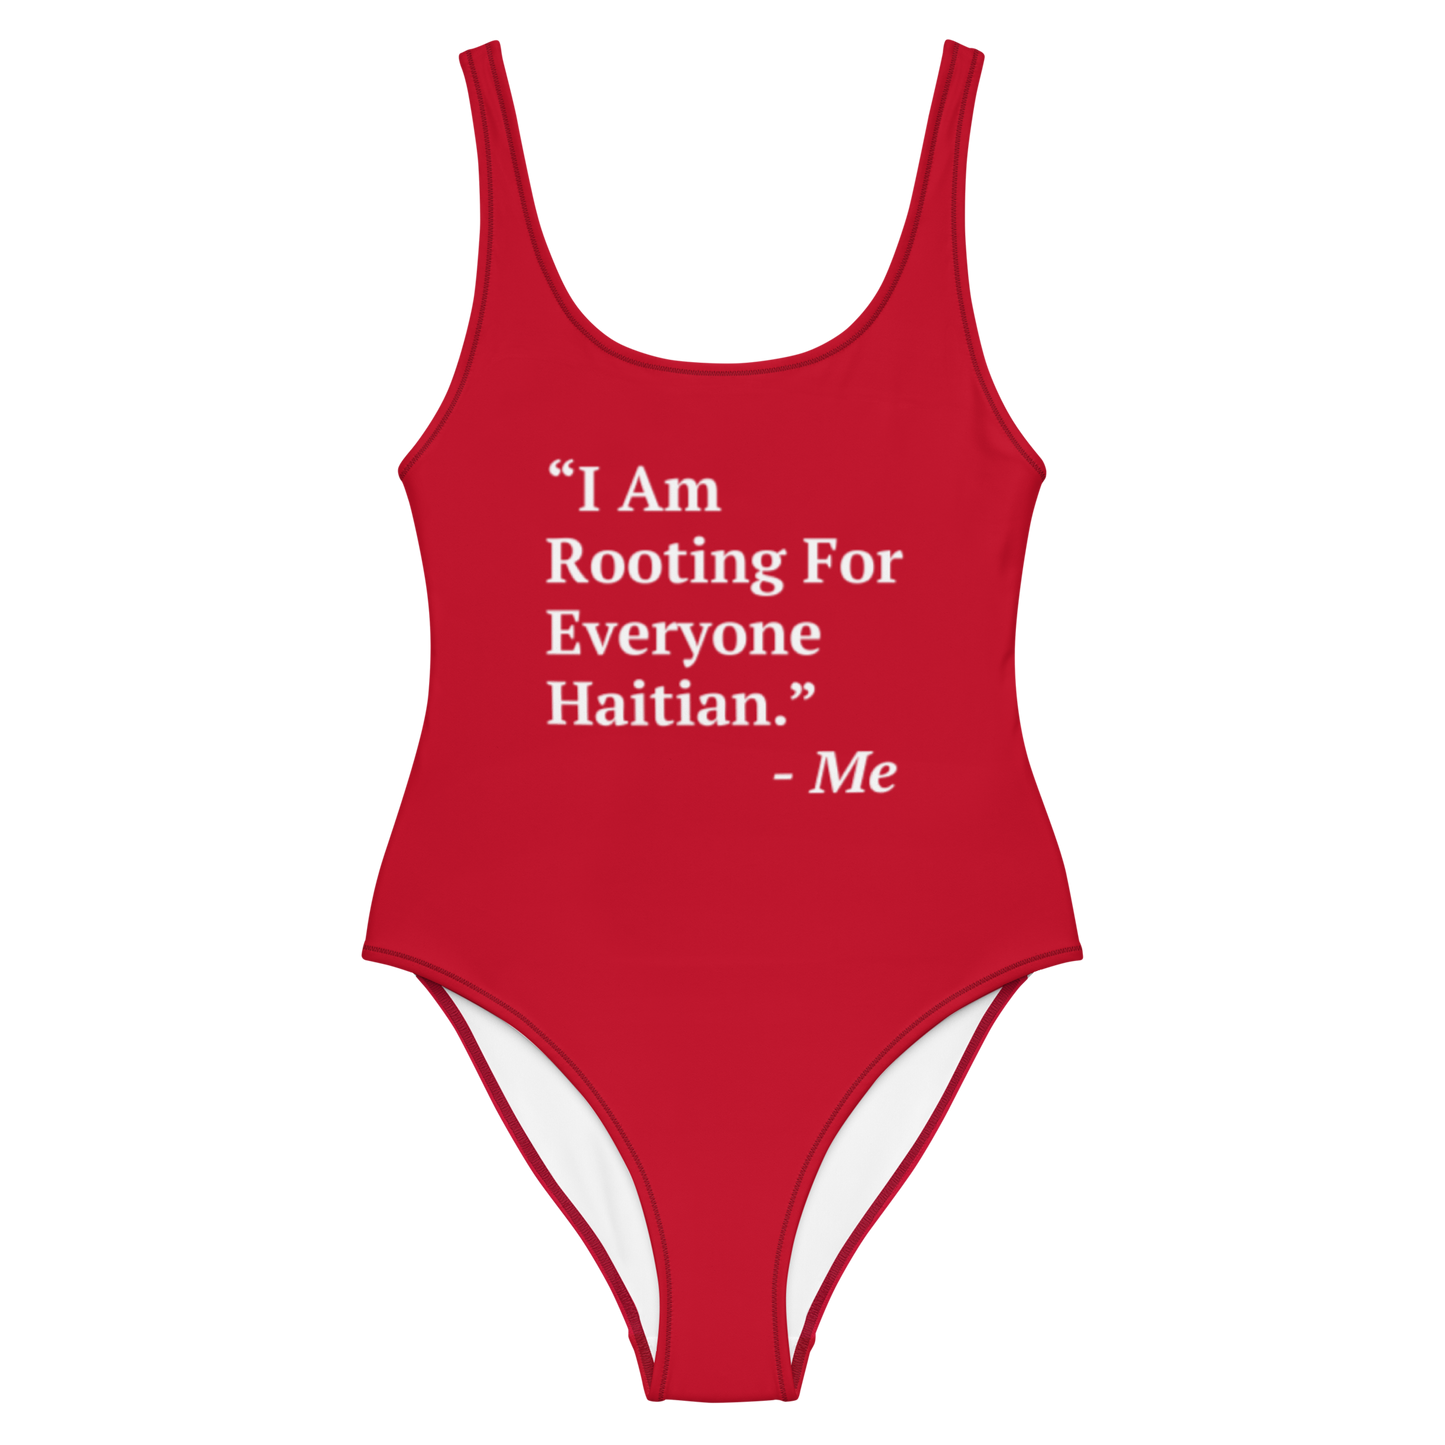 I Am Rooting: Haiti One-Piece Swimsuit